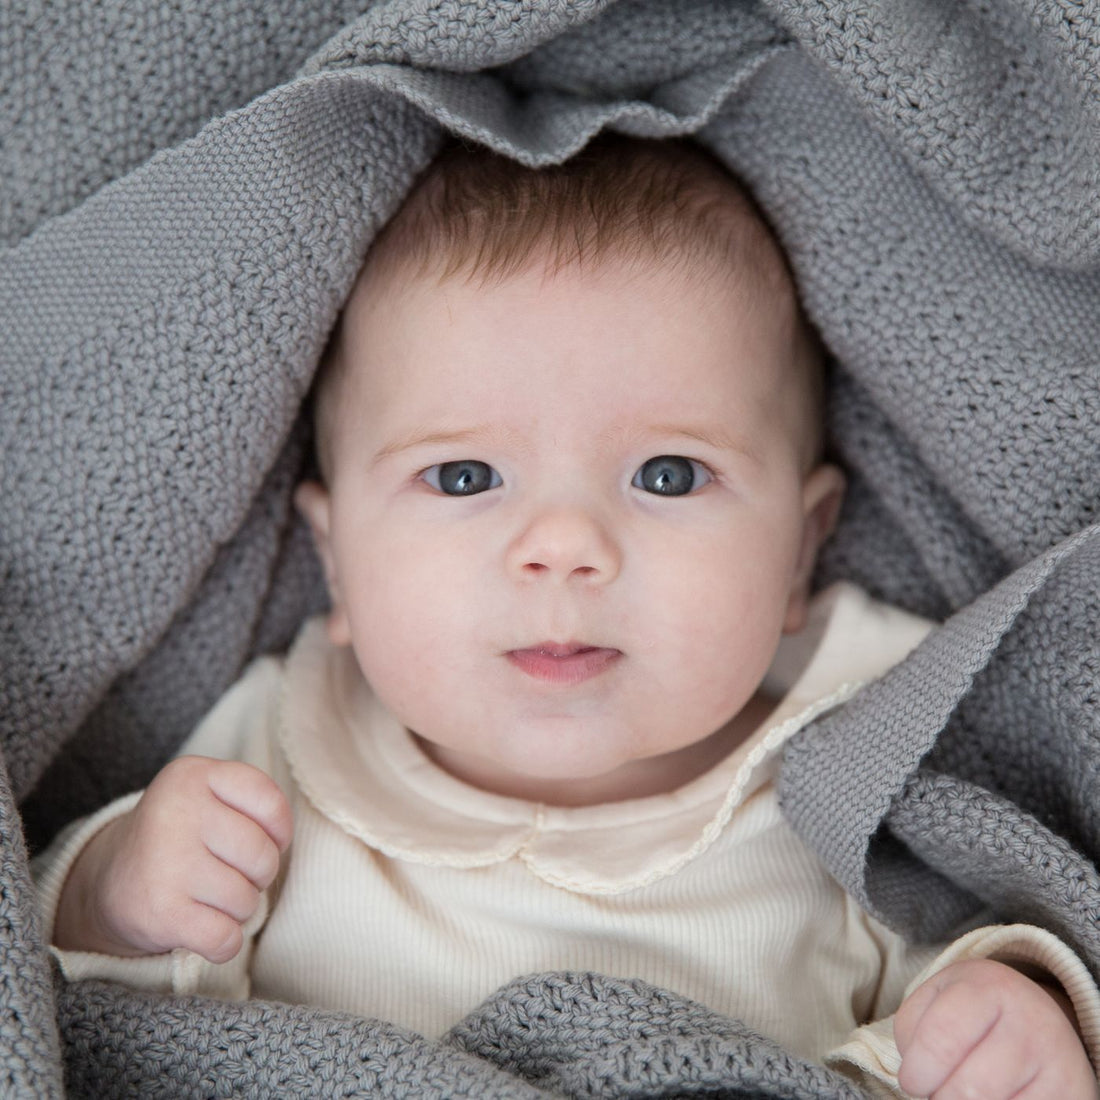 Why is a cellular baby blanket a good option for a new baby?